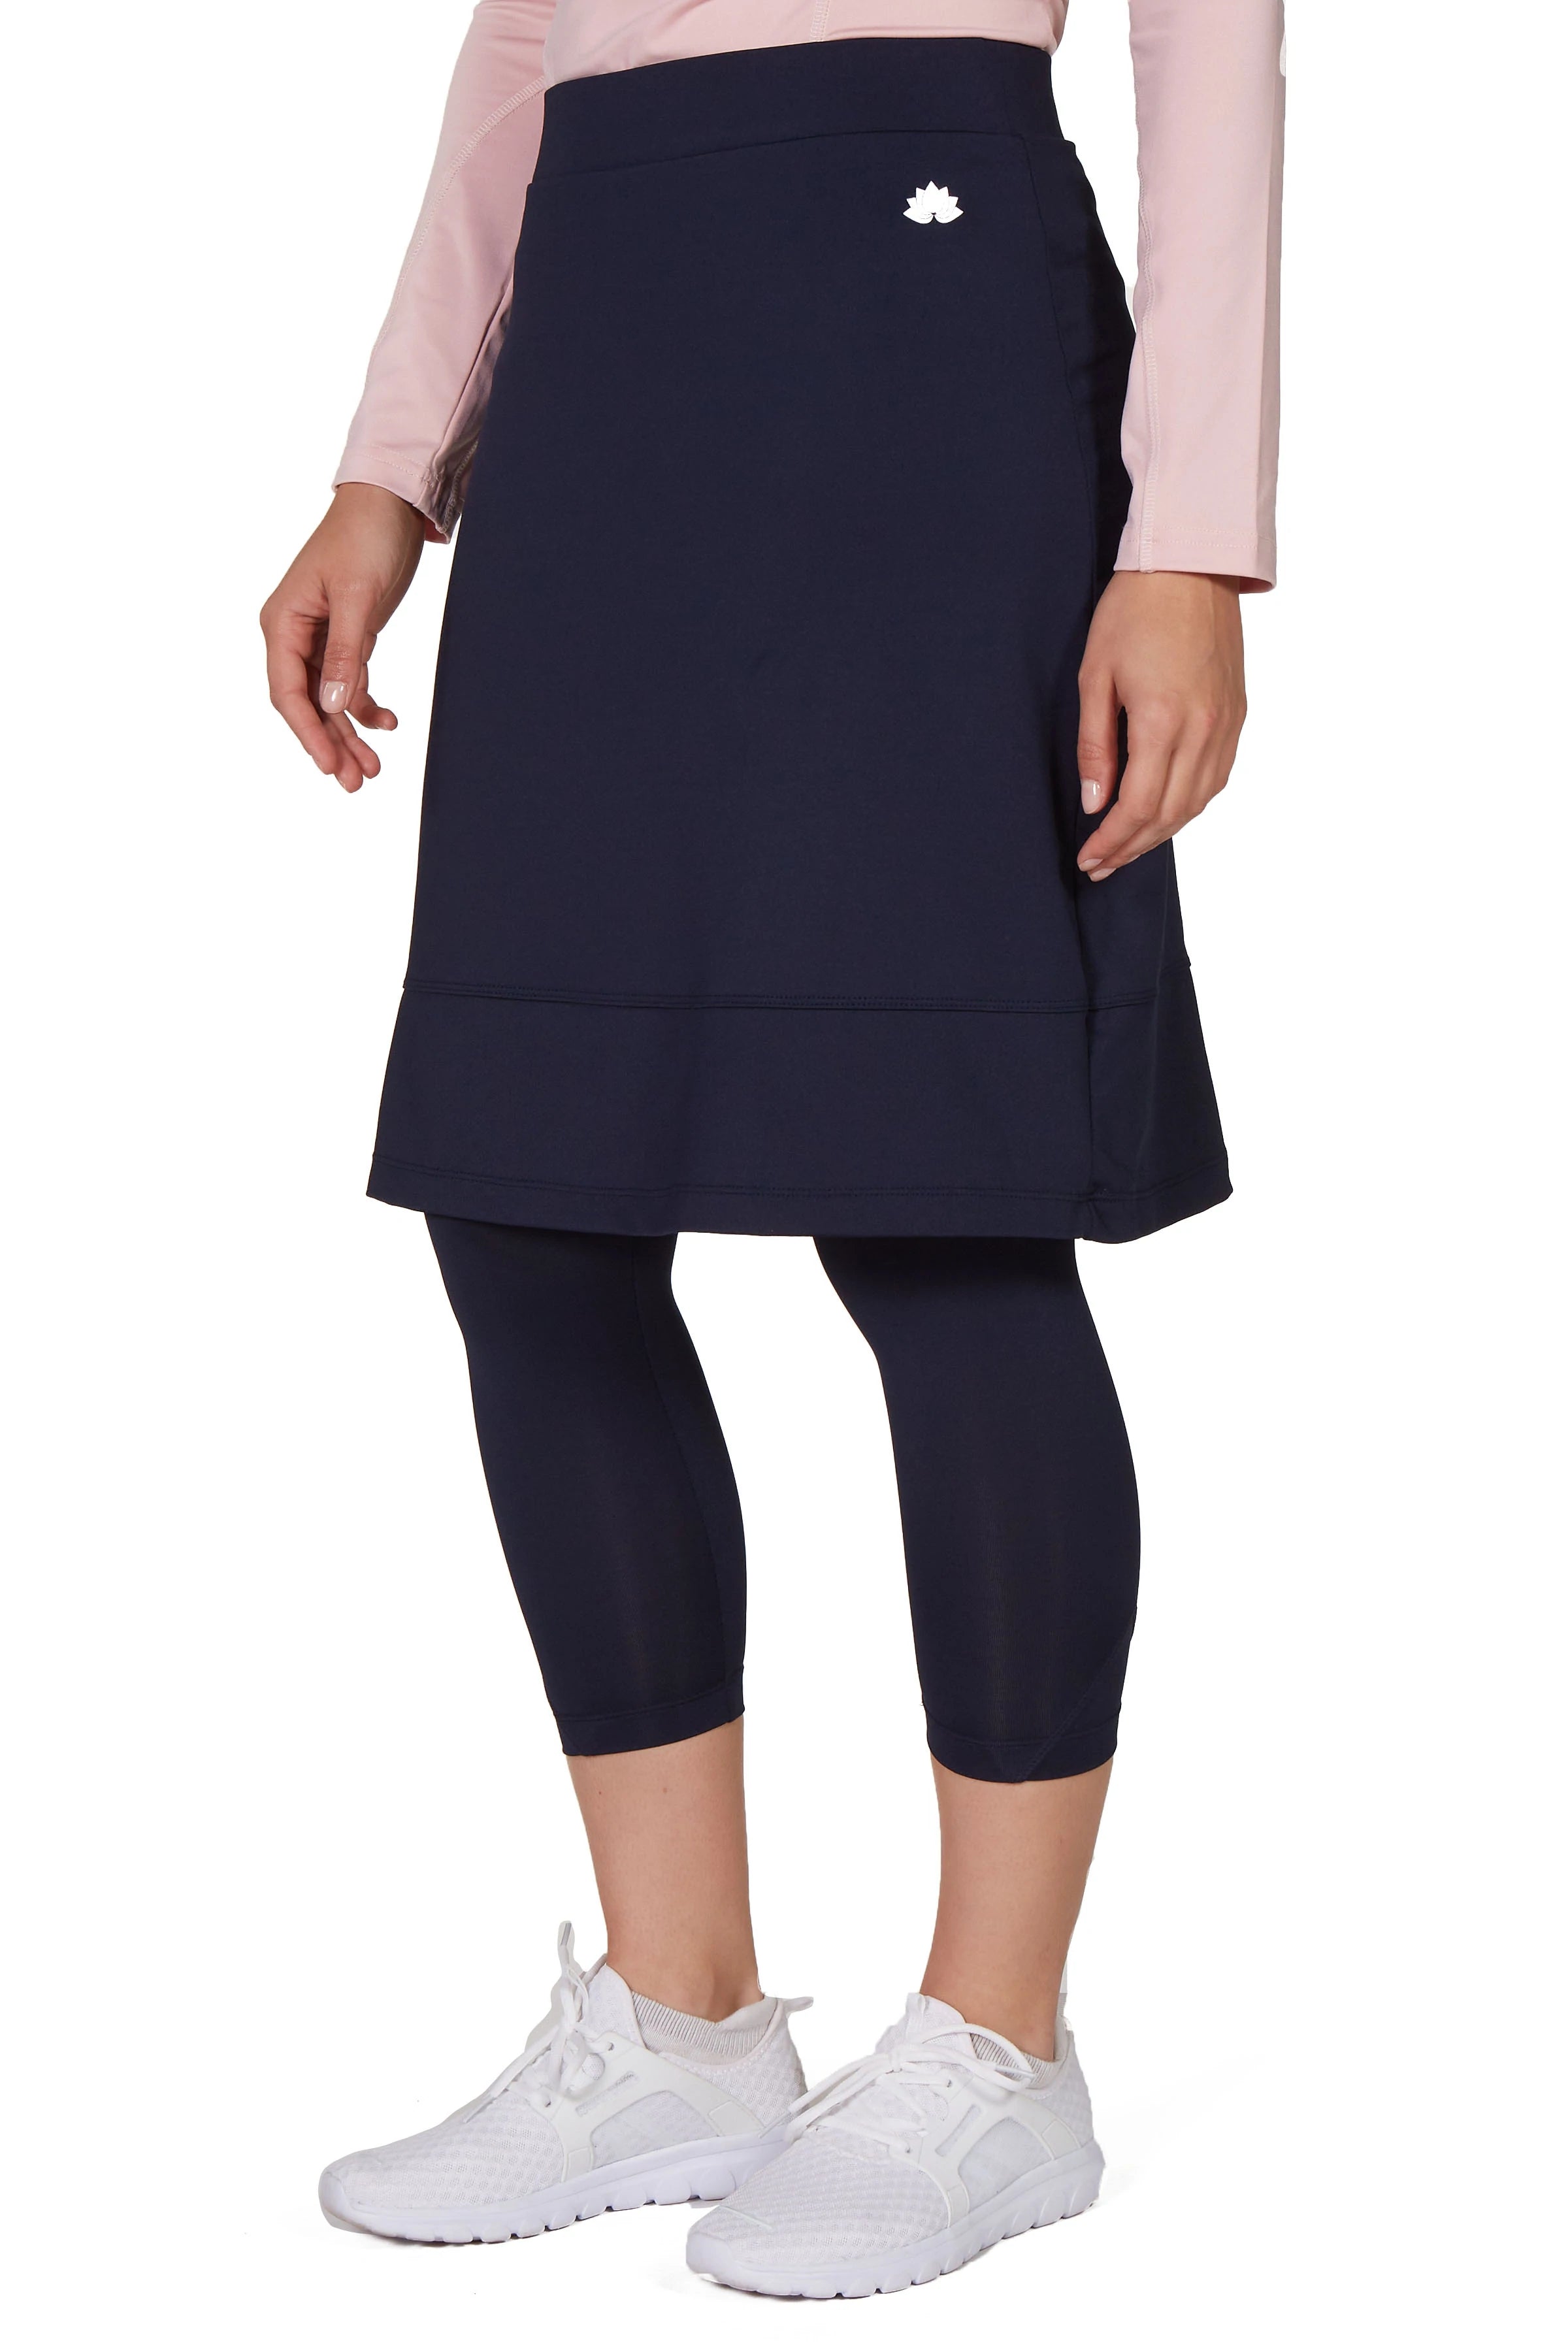 Snoga Mesh Athletic Skirt-Navy – Be Modest Boutique